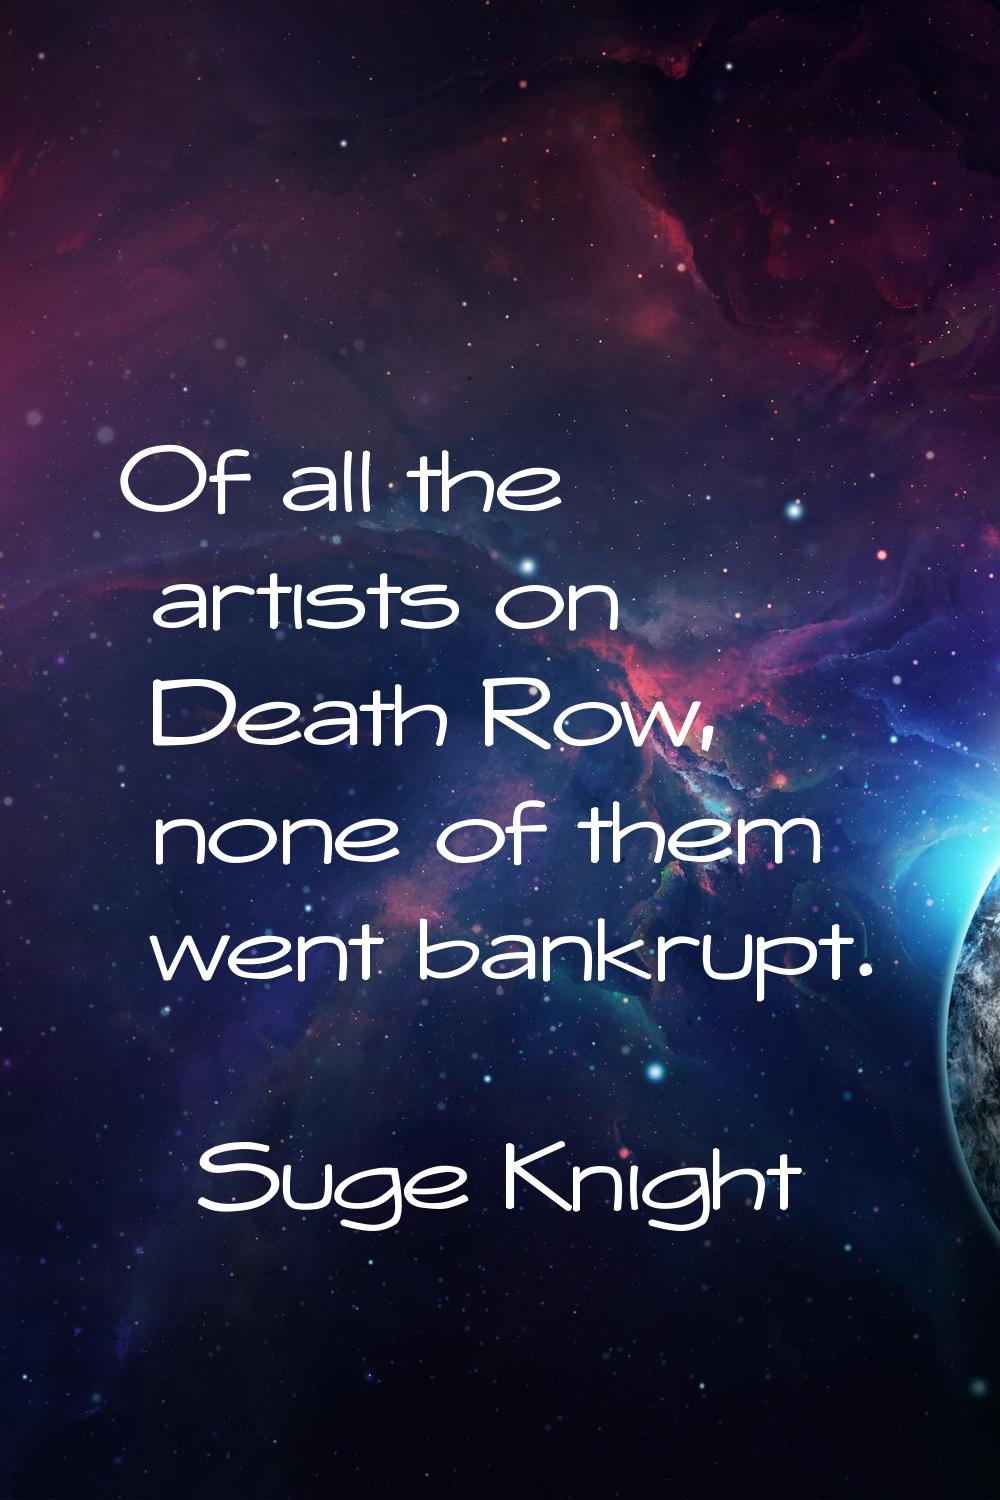 Of all the artists on Death Row, none of them went bankrupt.